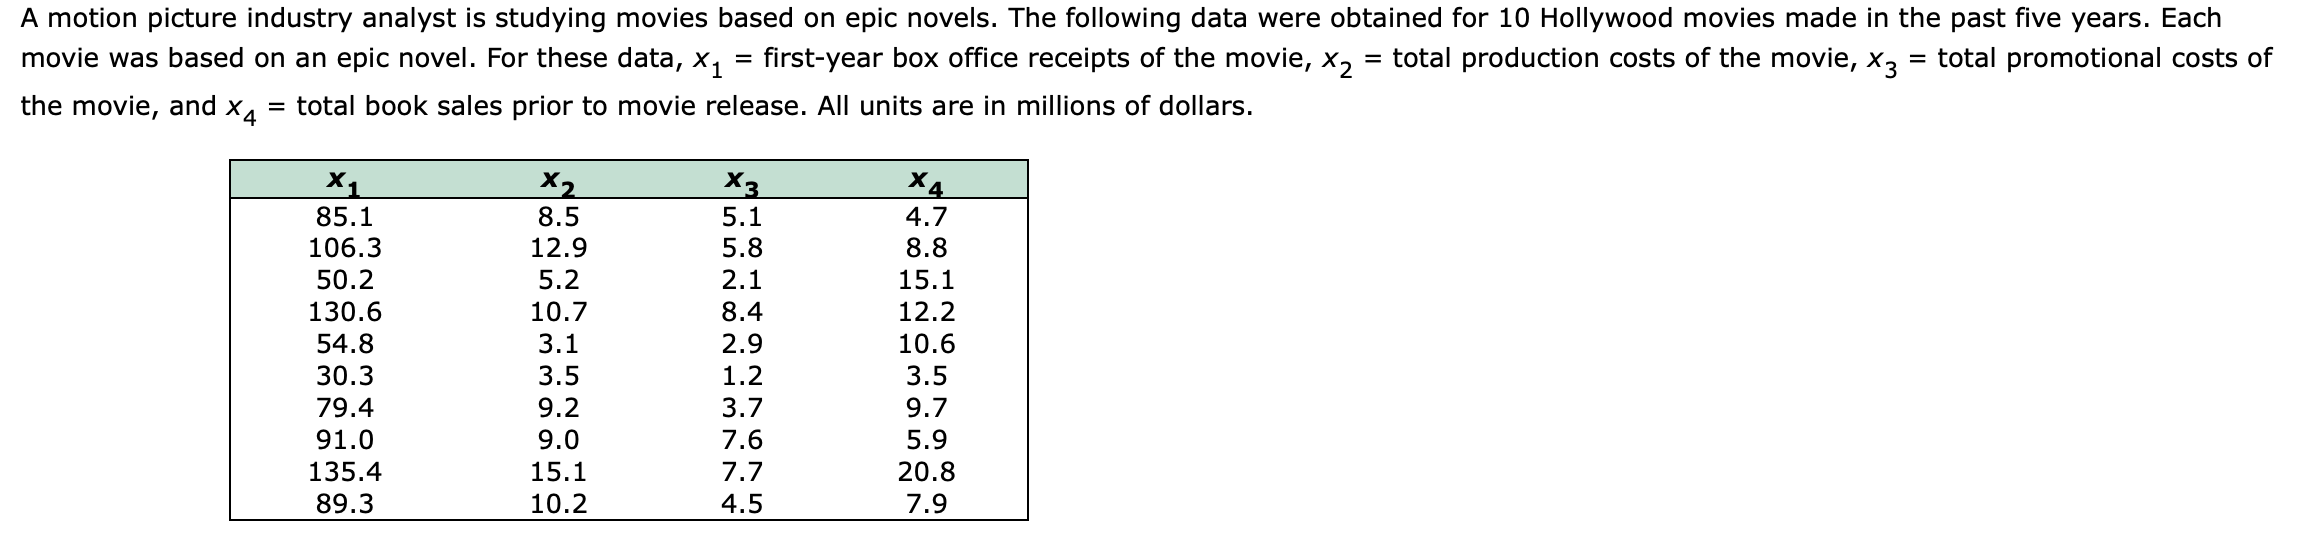 A motion picture industry analyst is studying movies based on epic novels. The following data were obtained for 10 Hollywood movies made in the past five years. Each
movie was based on an epic novel. For these data,
X1
first-year box office receipts of the movie, x,
= total production costs of the movie, x3
total promotional costs of
the movie, and
= total book sales prior to movie release. All units are in millions of dollars.
X1
X2
Xз
5.1
X4
85.1
8.5
4.7
106.3
12.9
5.8
8.8
50.2
5.2
2.1
15.1
130.6
10.7
8.4
12.2
54.8
3.1
2.9
10.6
30.3
3.5
1.2
3.5
79.4
9.2
3.7
9.7
91.0
9.0
7.6
5.9
135.4
15.1
7.7
20.8
89.3
10.2
4.5
7.9
